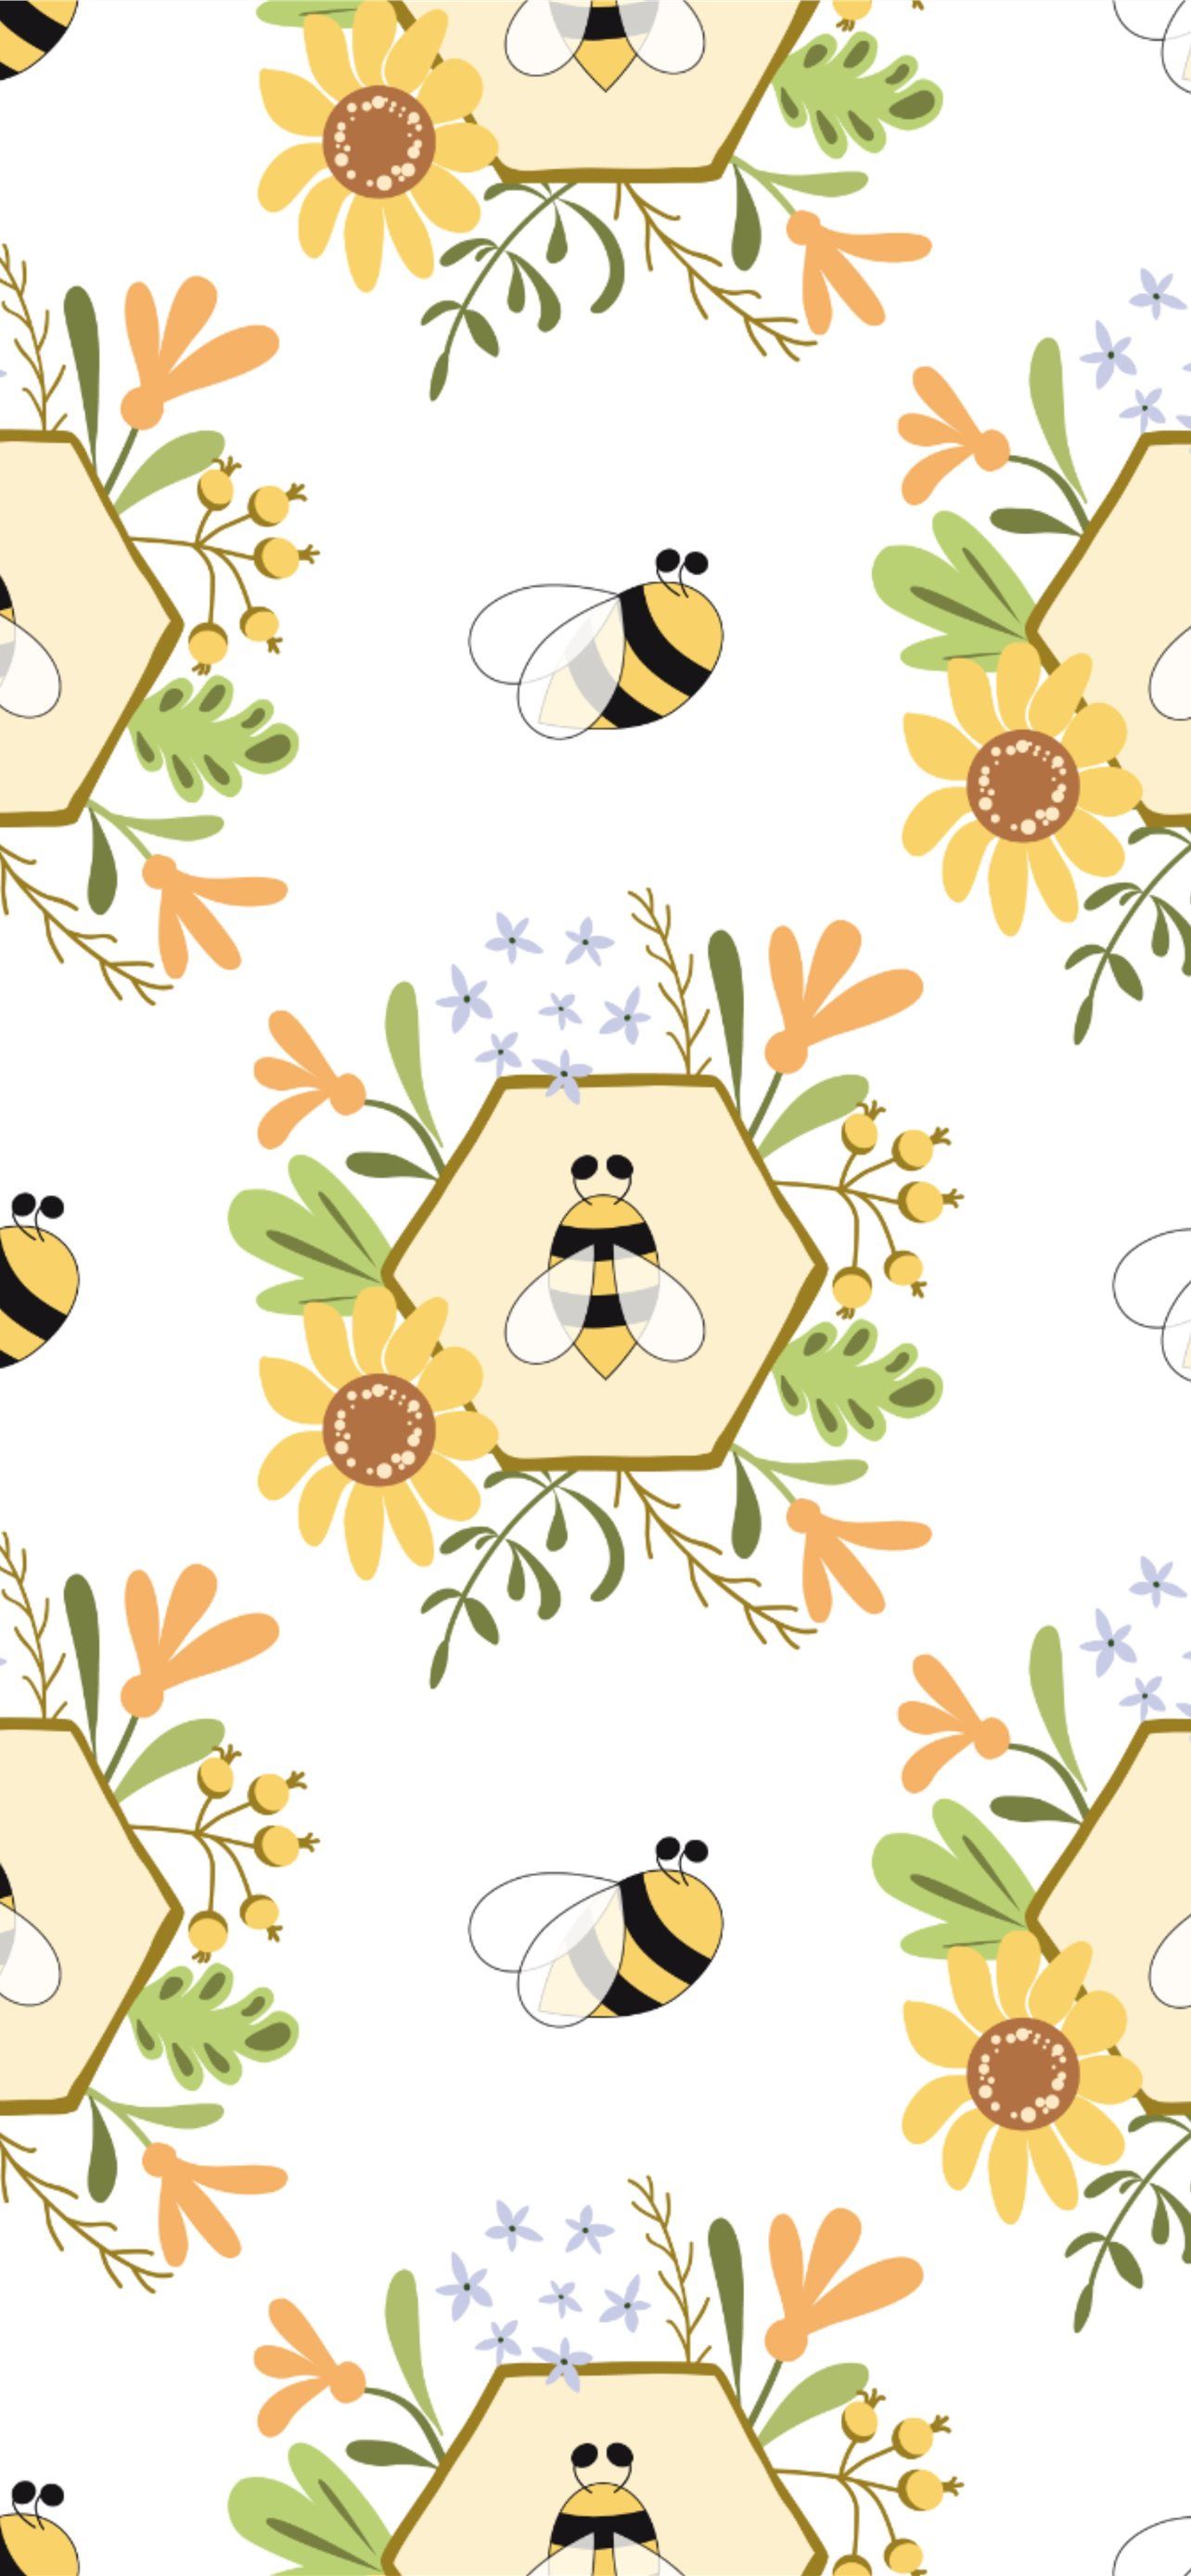 A pattern of bees and flowers on a white background - Bee, honey